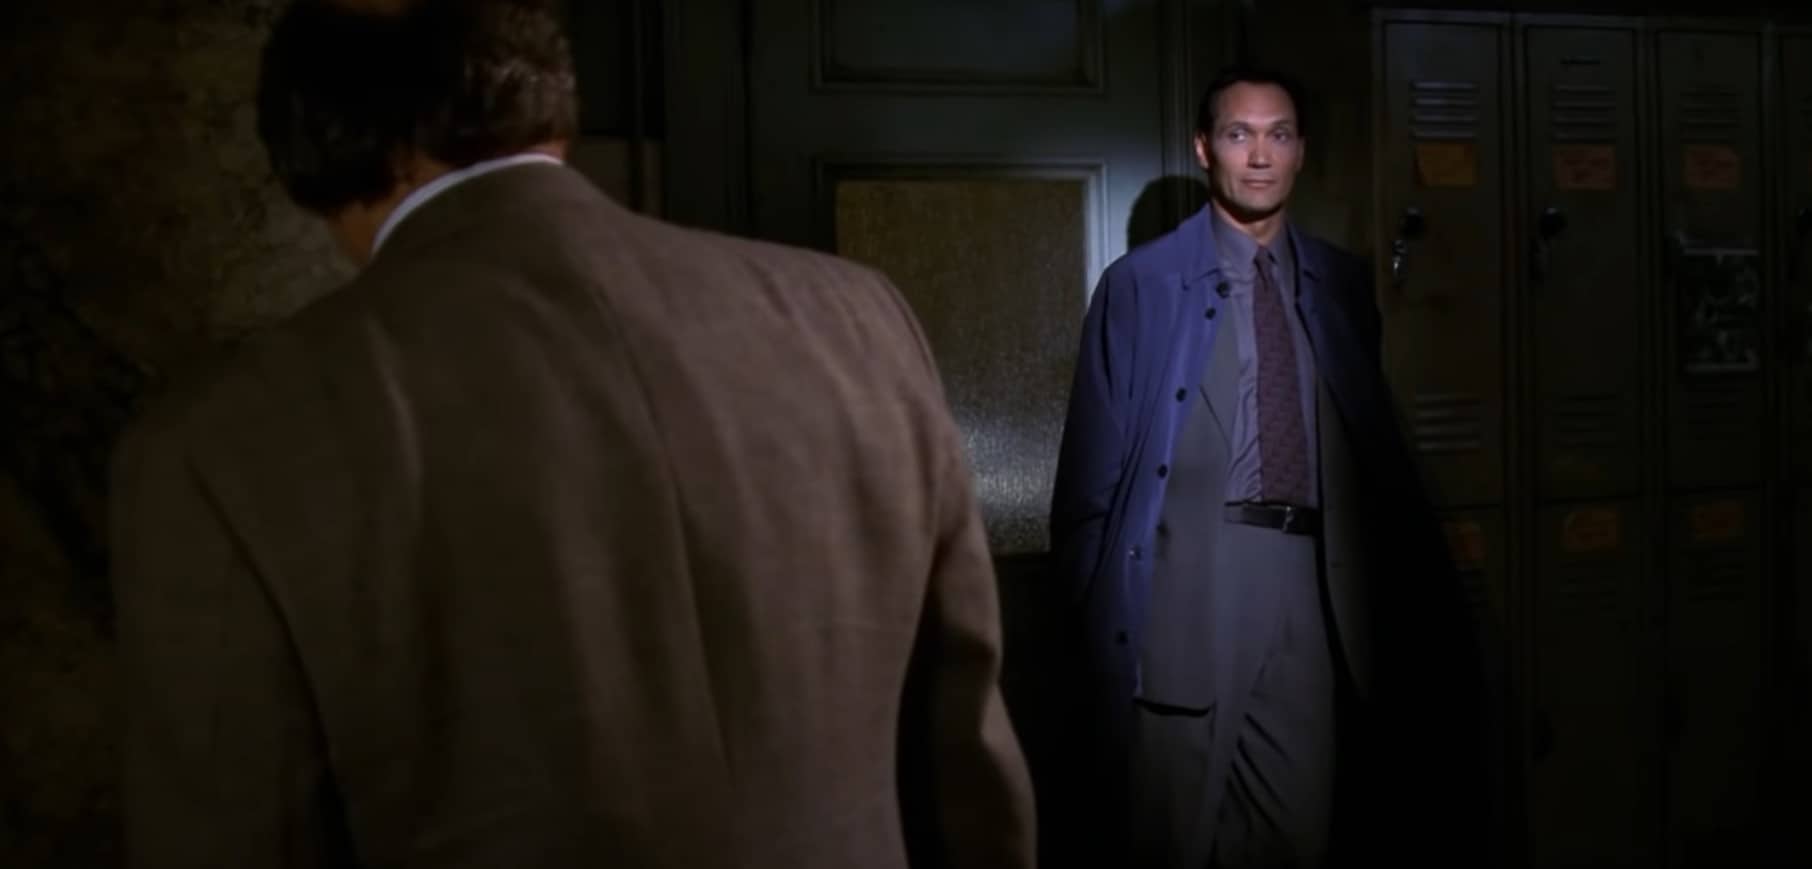 Why Did Jimmy Smits Leave NYPD Blue?